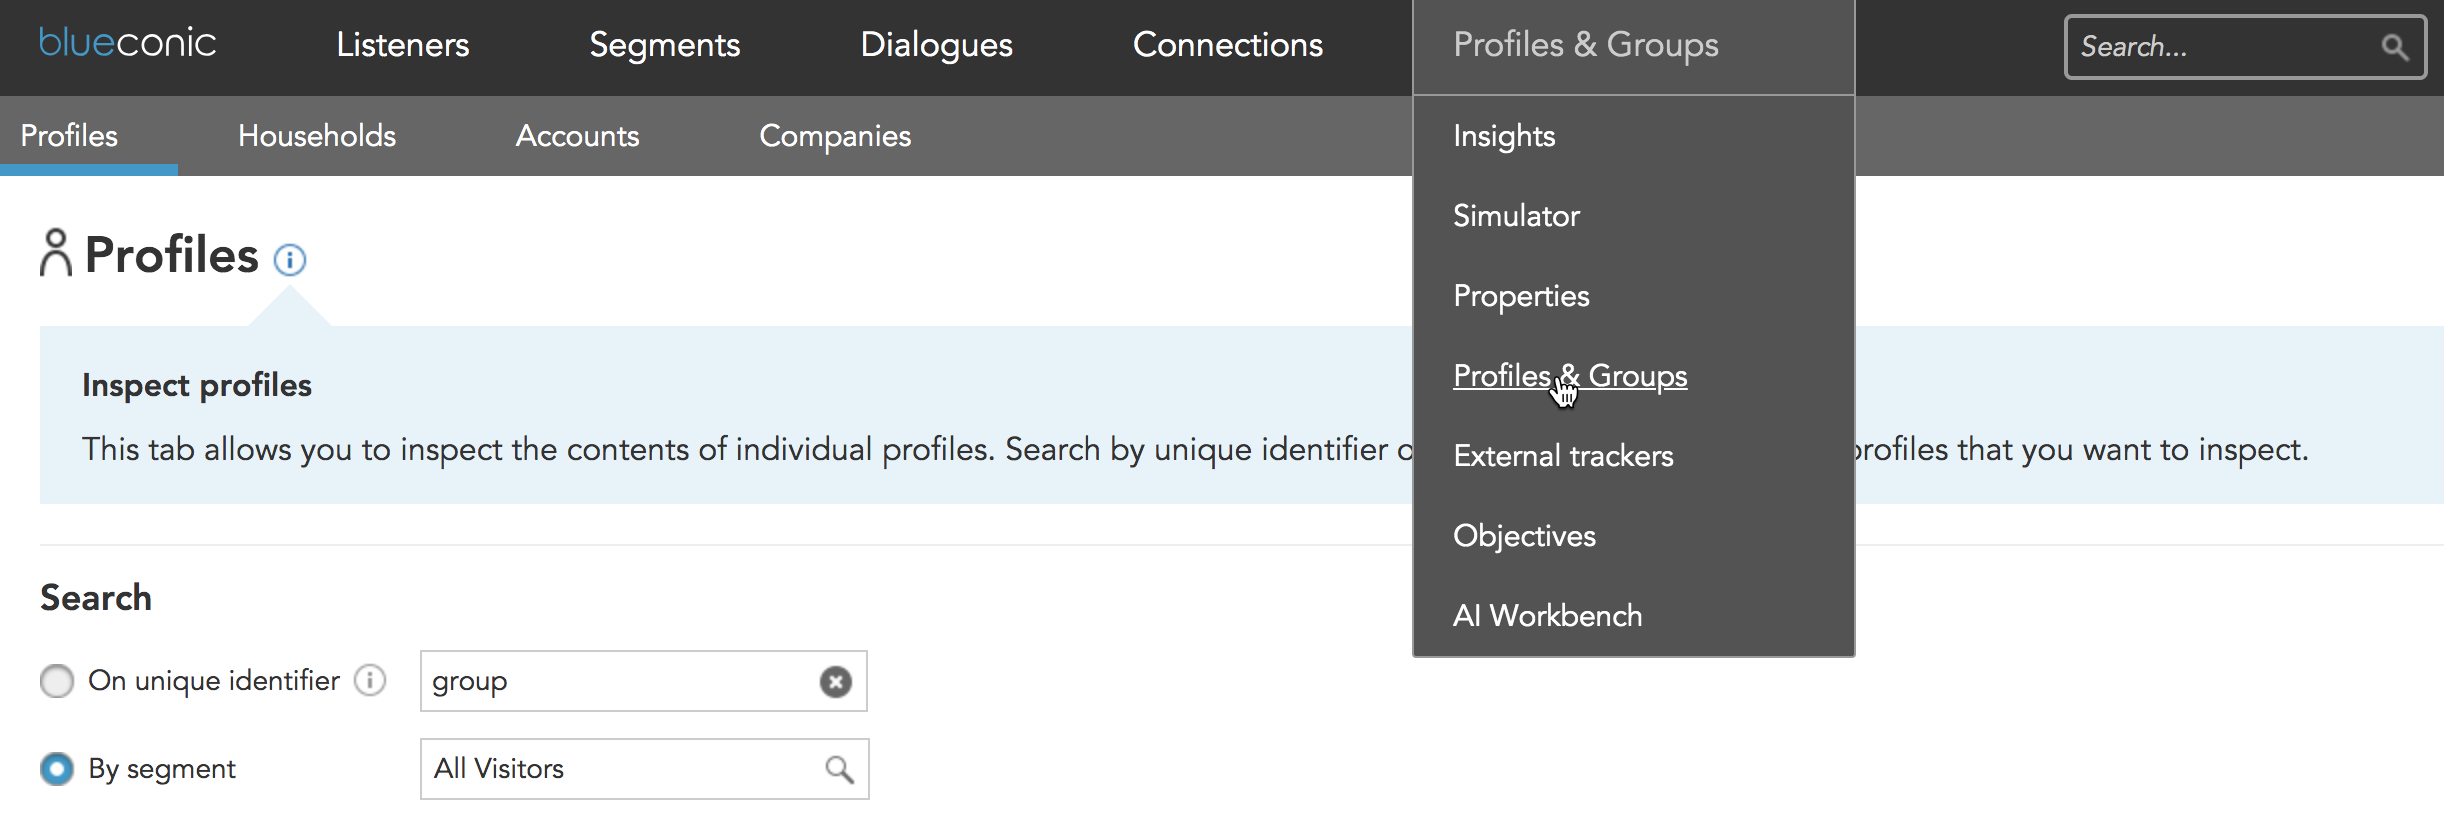 How do you associate profiles into families households accounts or company groups in BlueConic?